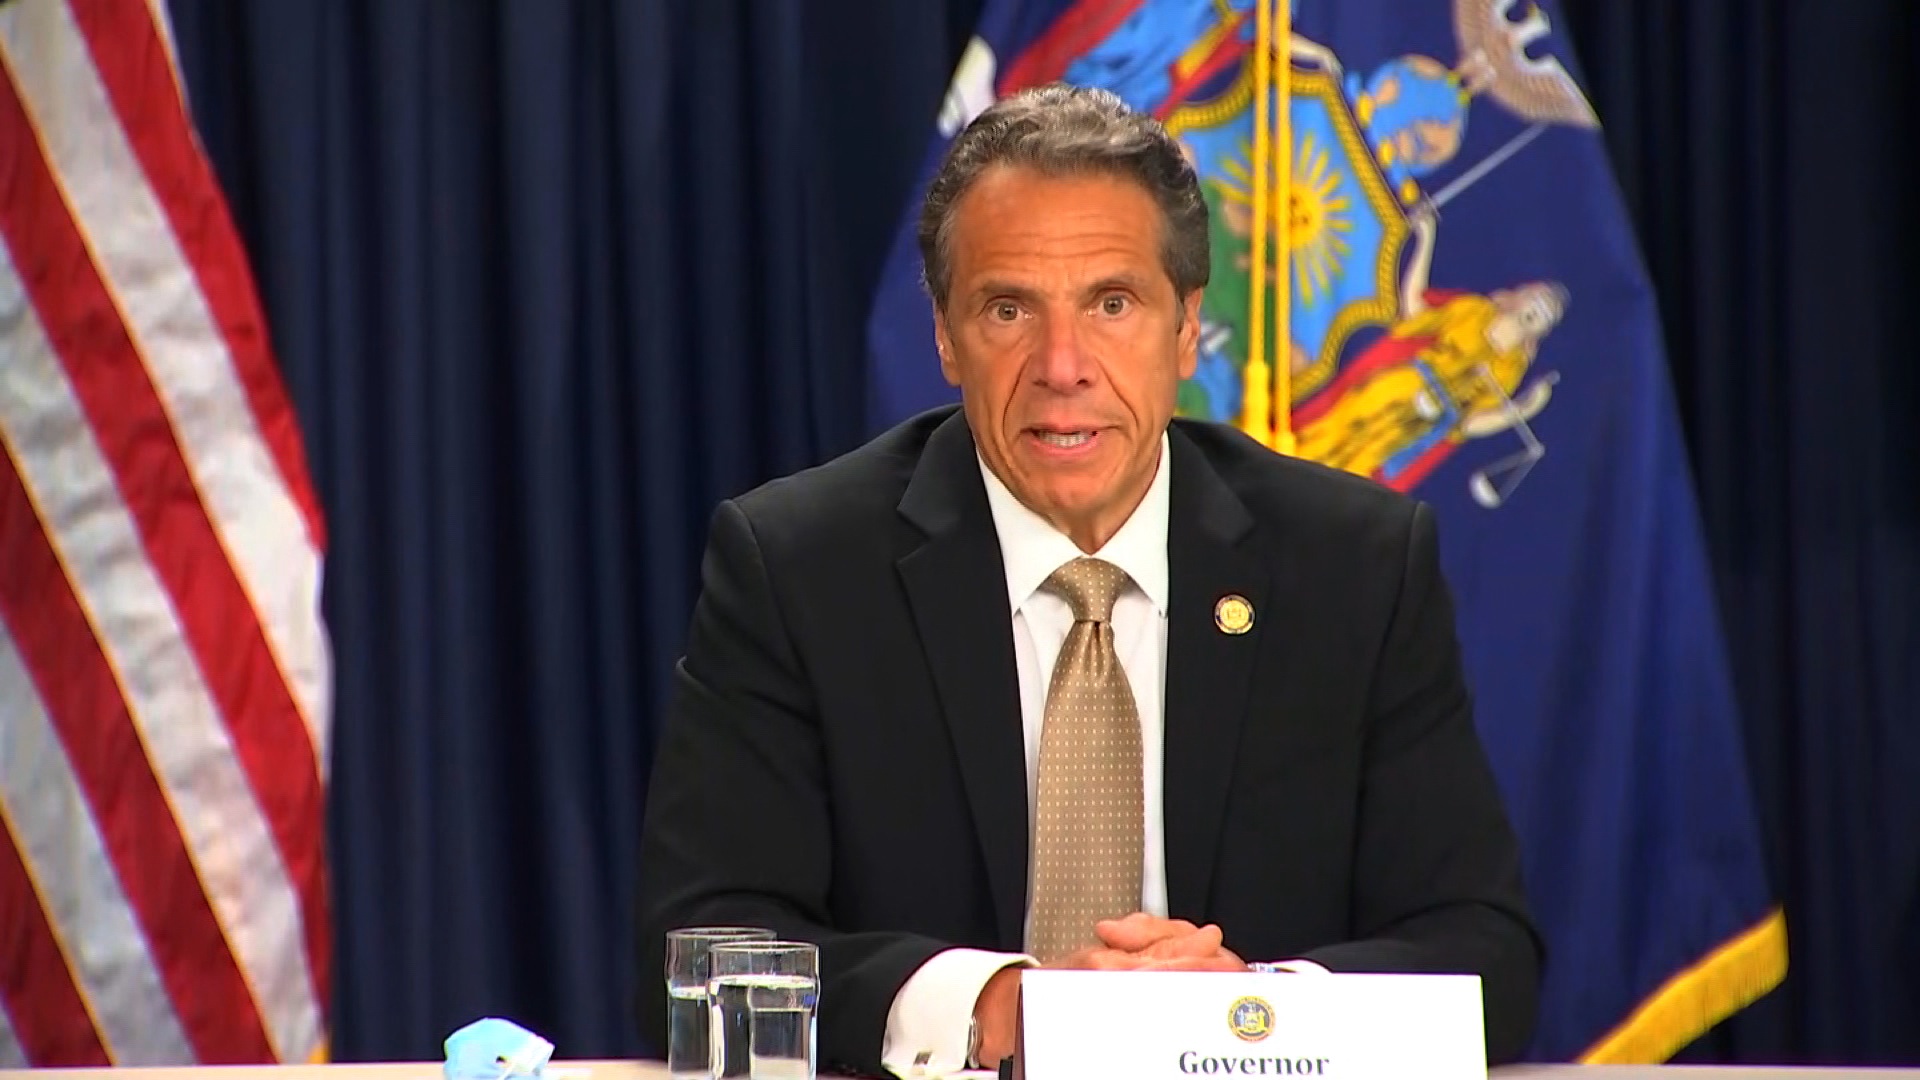 New York Gov. Andrew Cuomo speaks during a press conference on June 1.